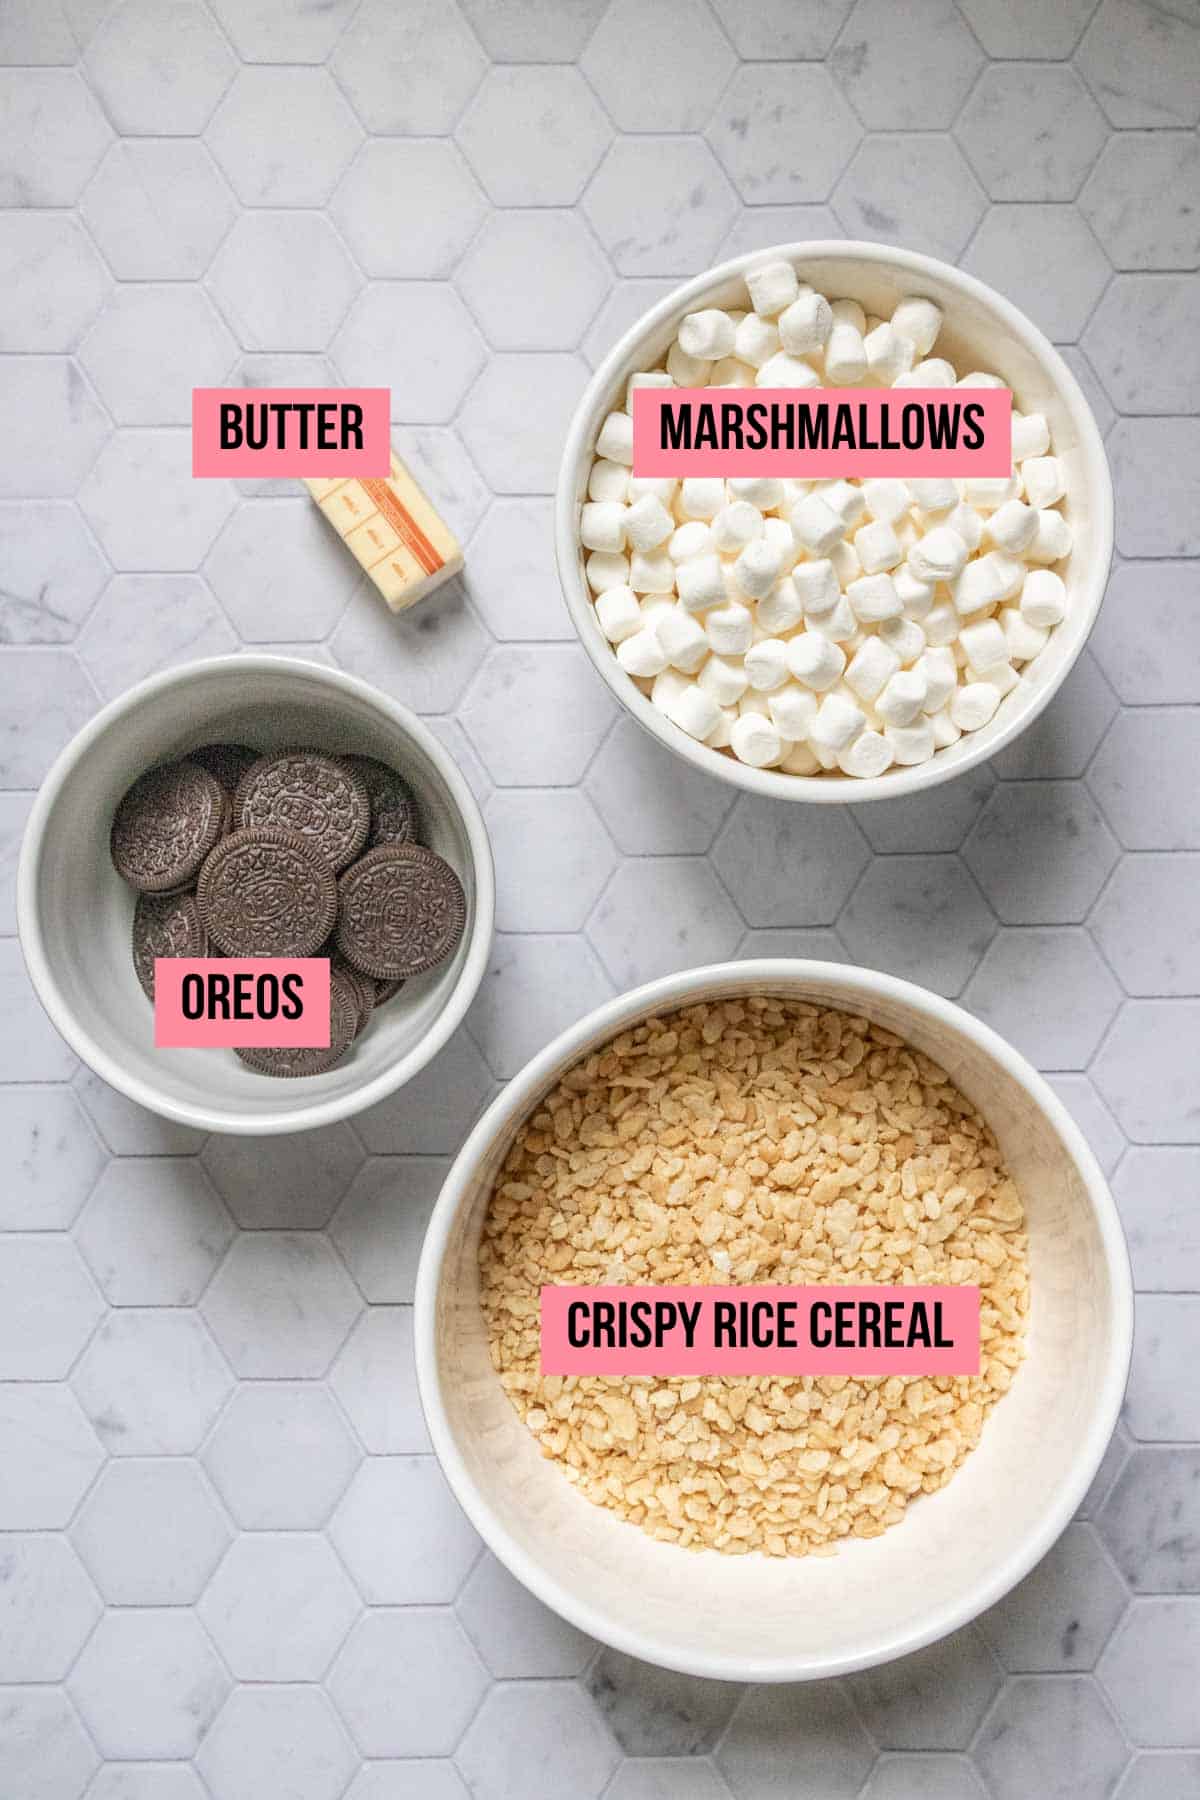 Ingredients for Oreo rice krispie treats on a tile surface with labels.